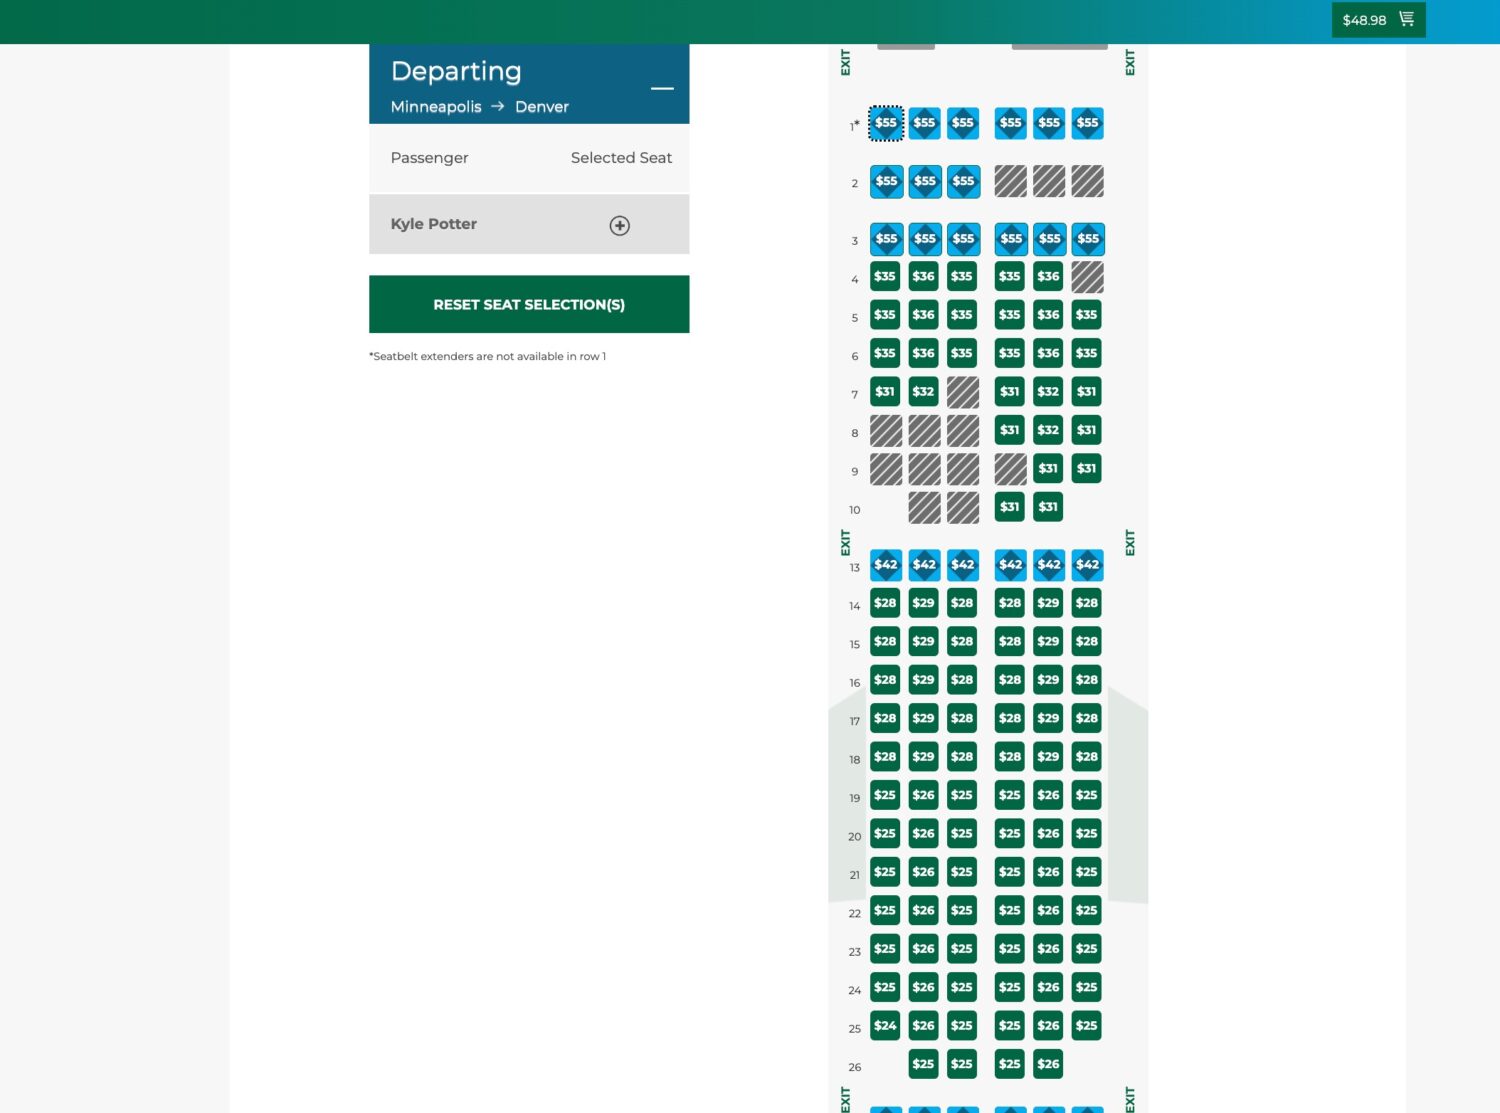 frontier seat selection fees